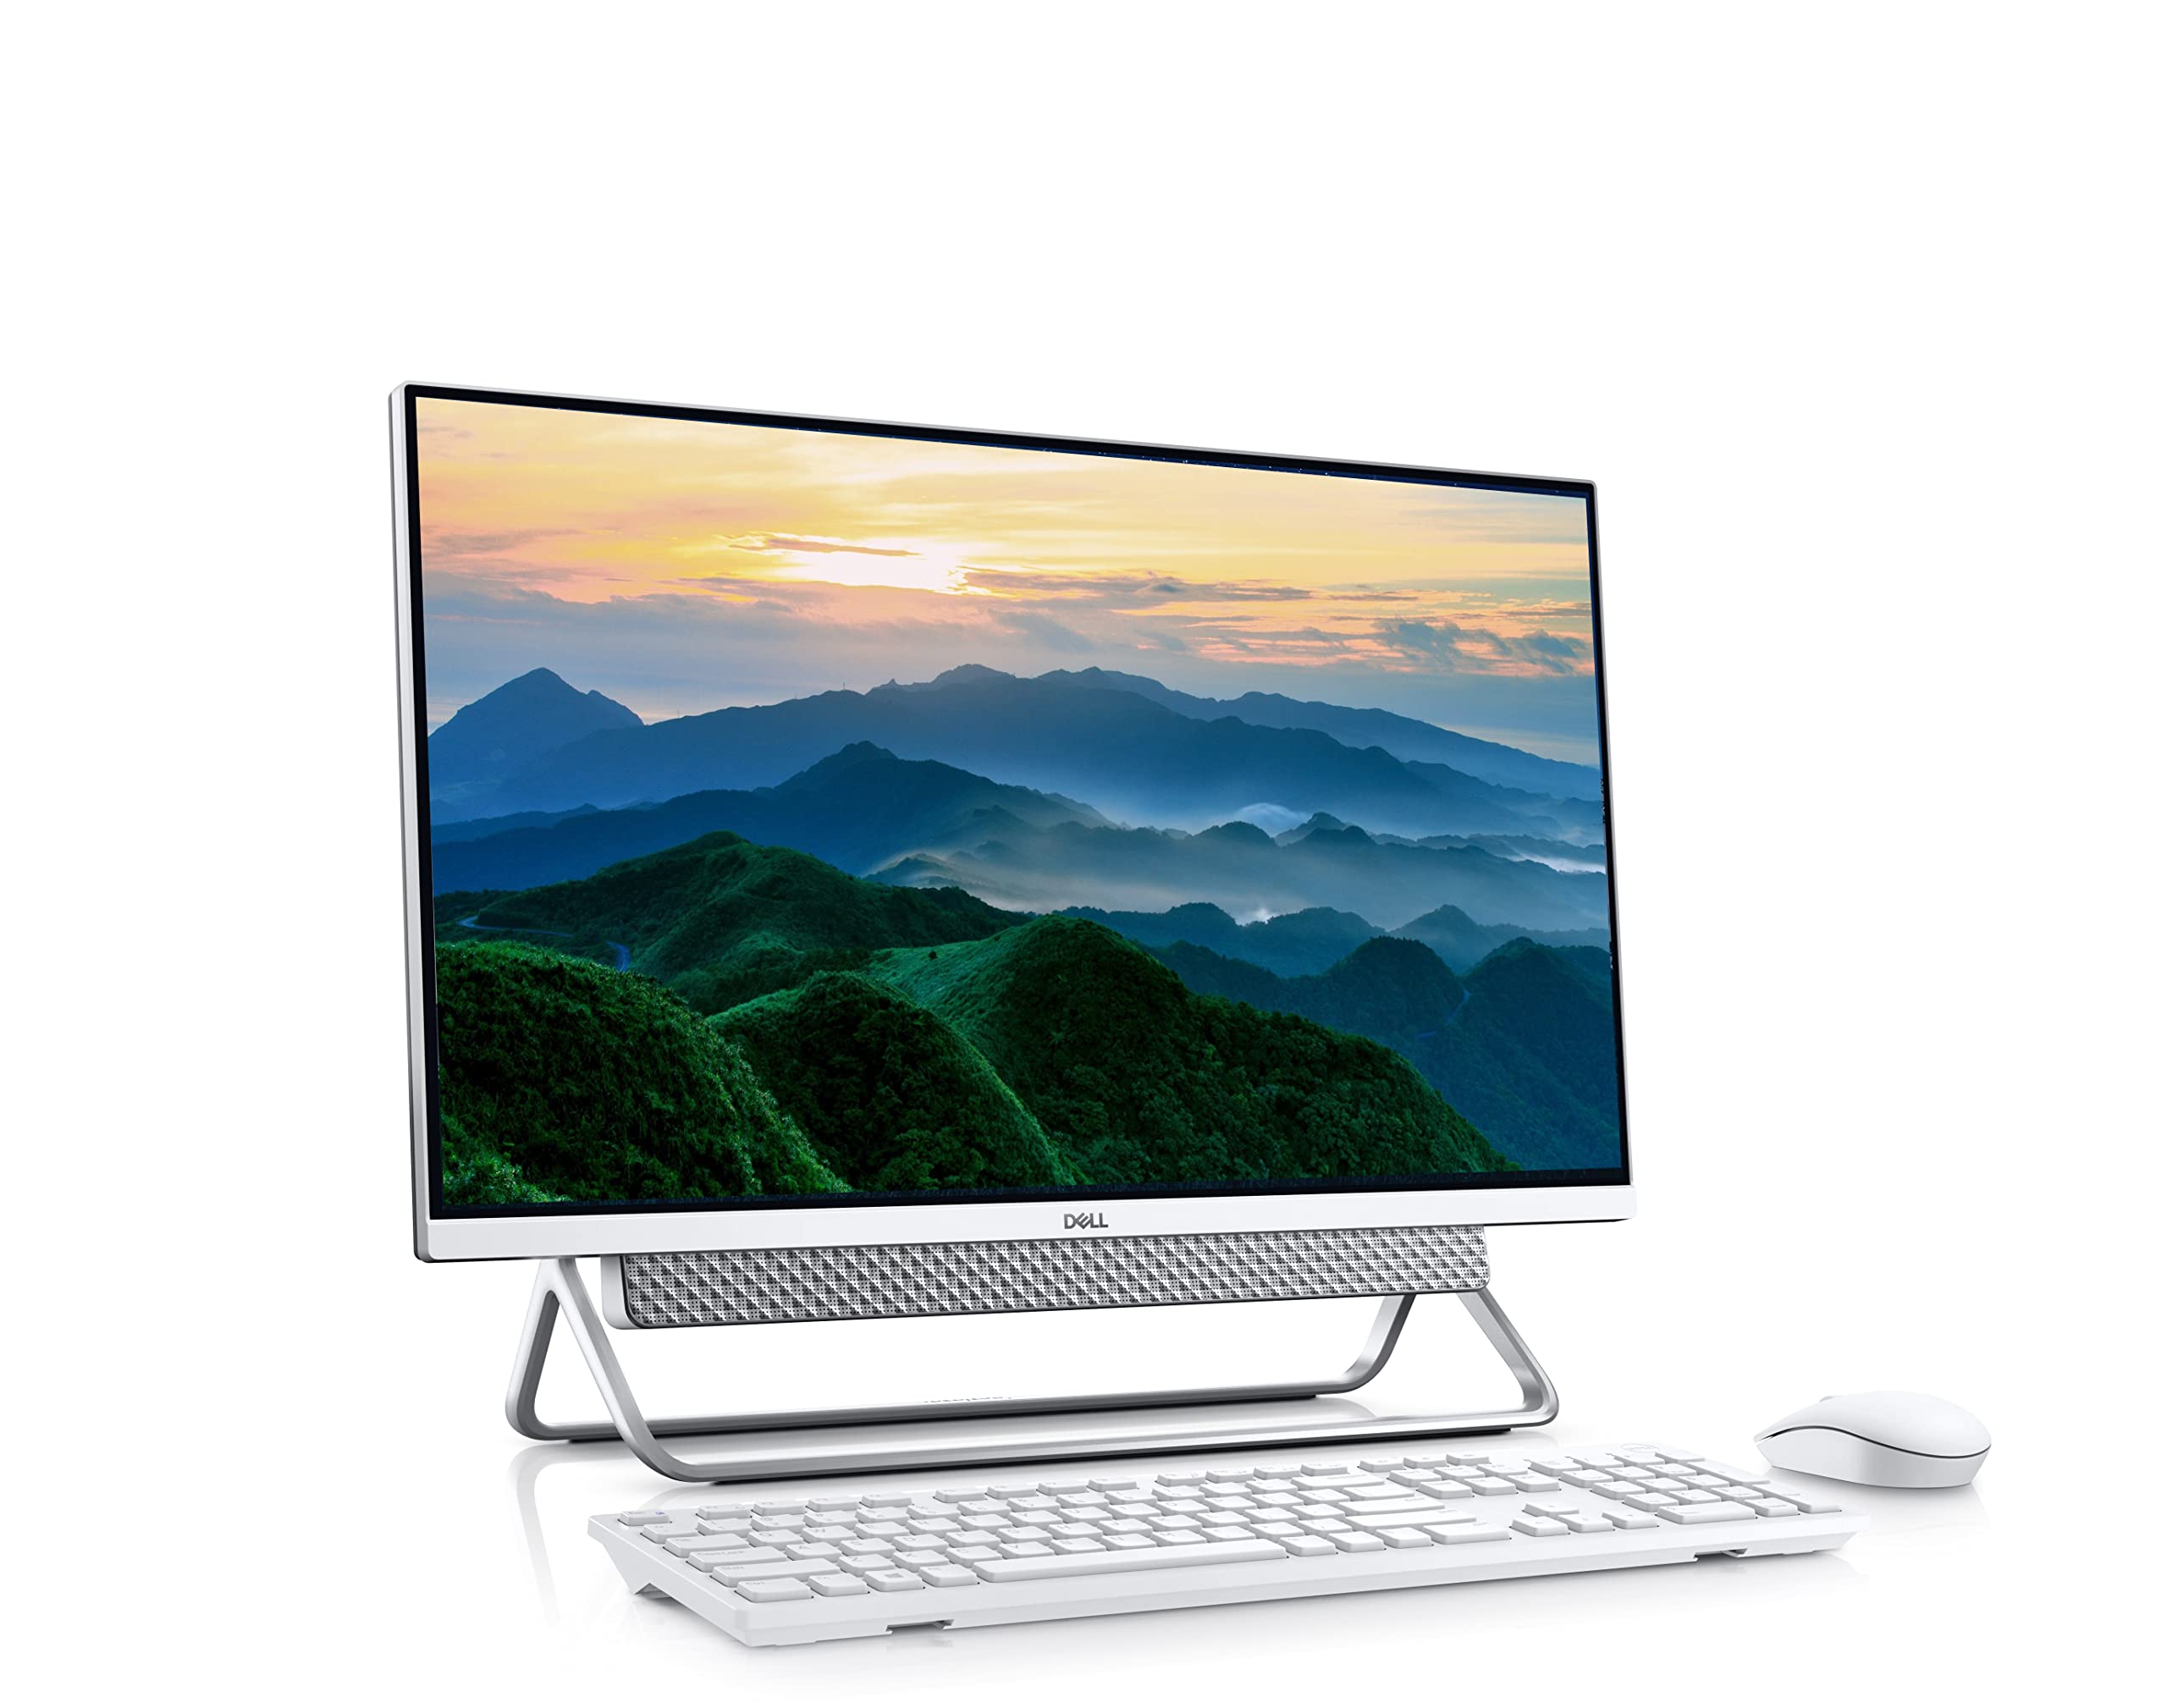 Dell 2022 Newest Inspiron 7700 All-in-One Desktop, 27'' FHD Touchscreen, 11th Gen Intel i7-1165G7, GeForce MX330, 64GB RAM, 2TB SSD, IR Camera, WiFi 6, Wireless KB&Mouse, Win 11 Home, Silver